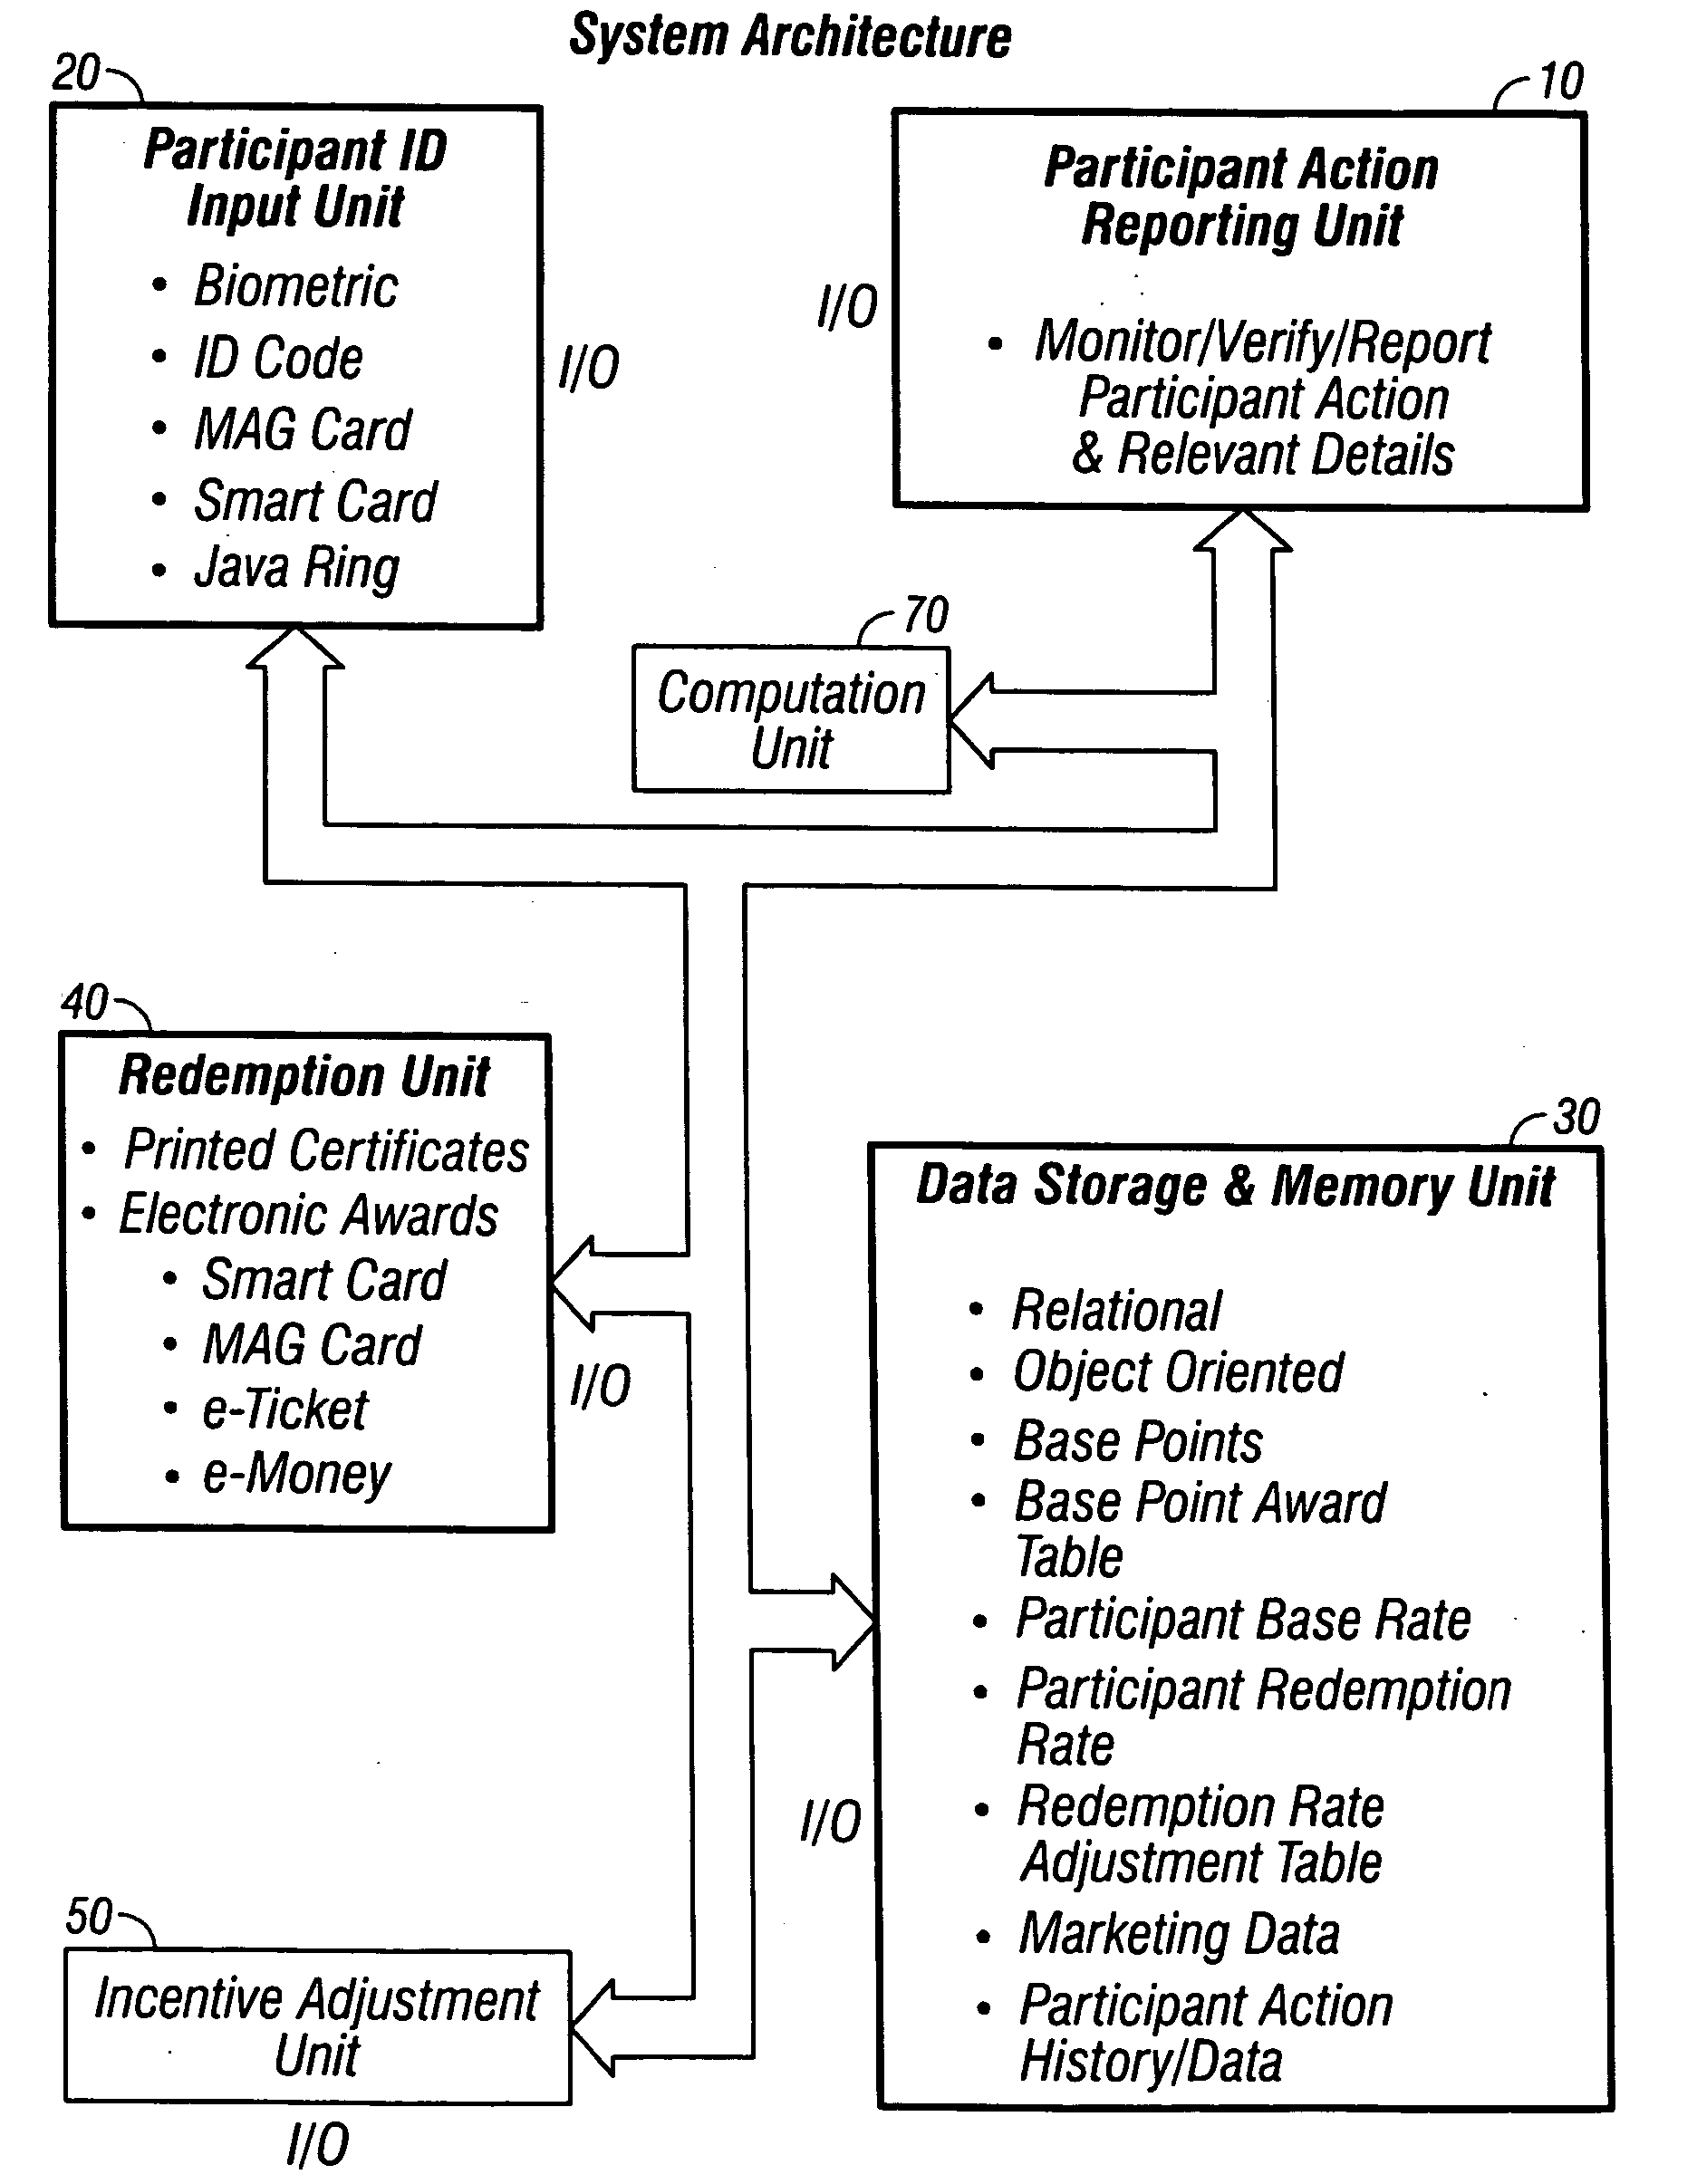 System and method for promoting commerce, including sales agent assisted commerce, in a networked economy